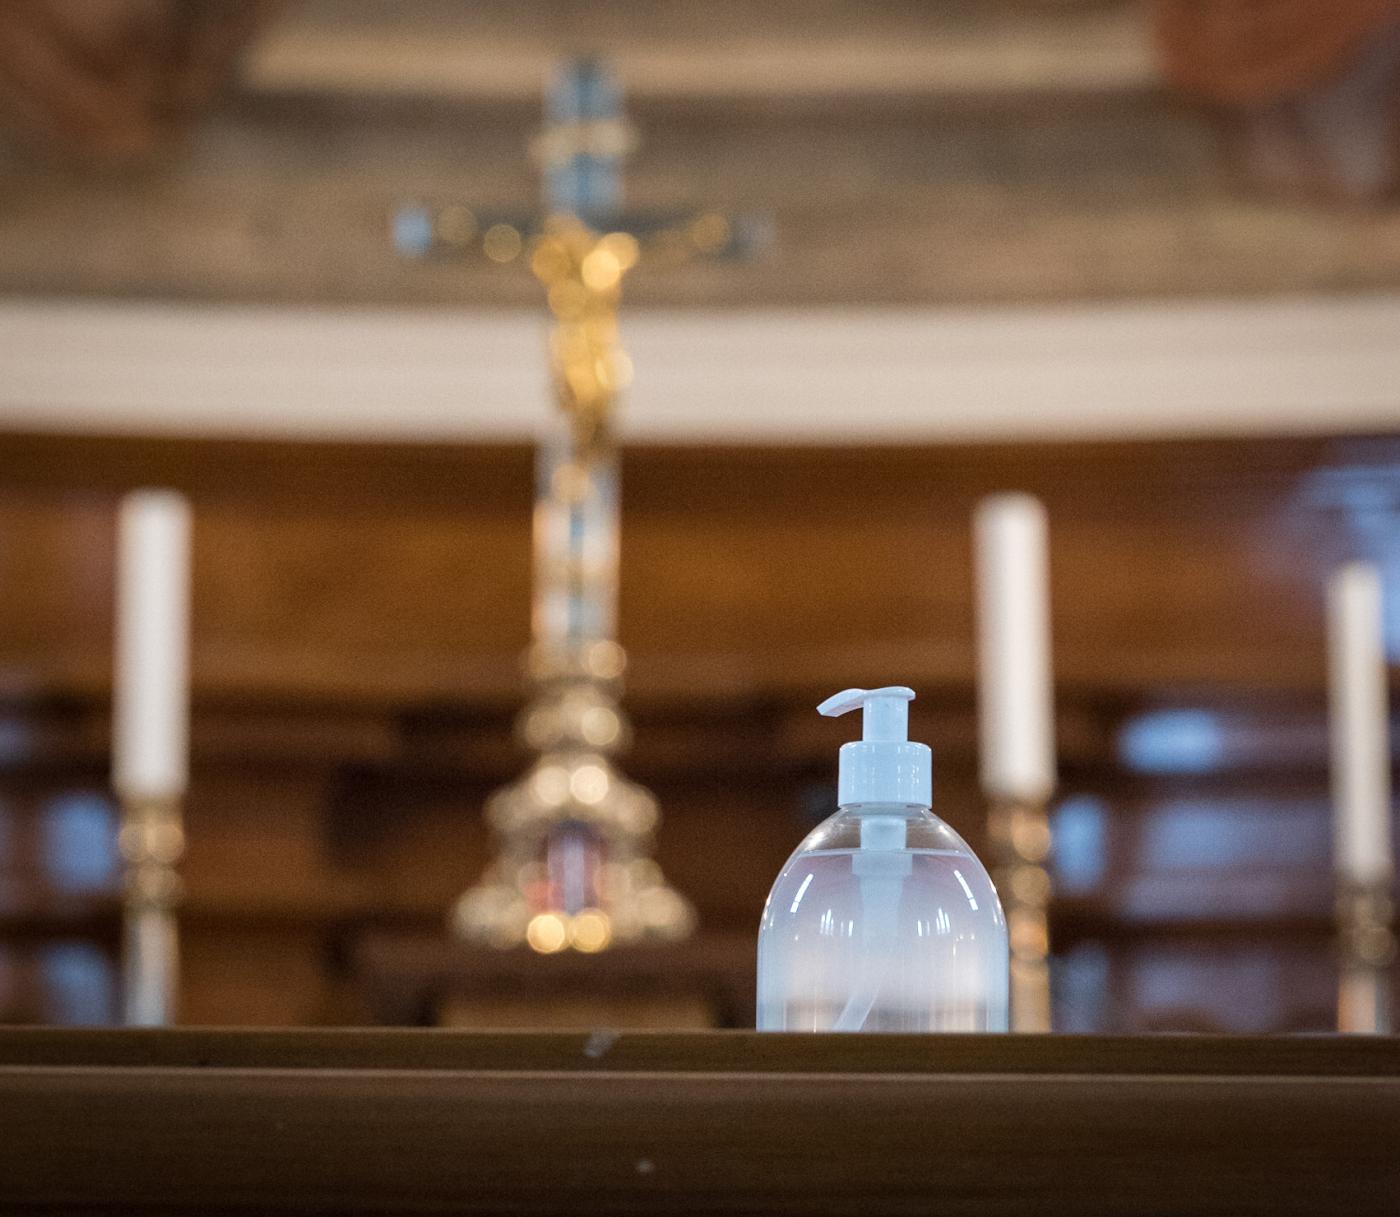 Bottle of hand sanitizer sits on wooden table in the foreground, in front of a blurred crucifix in the background.